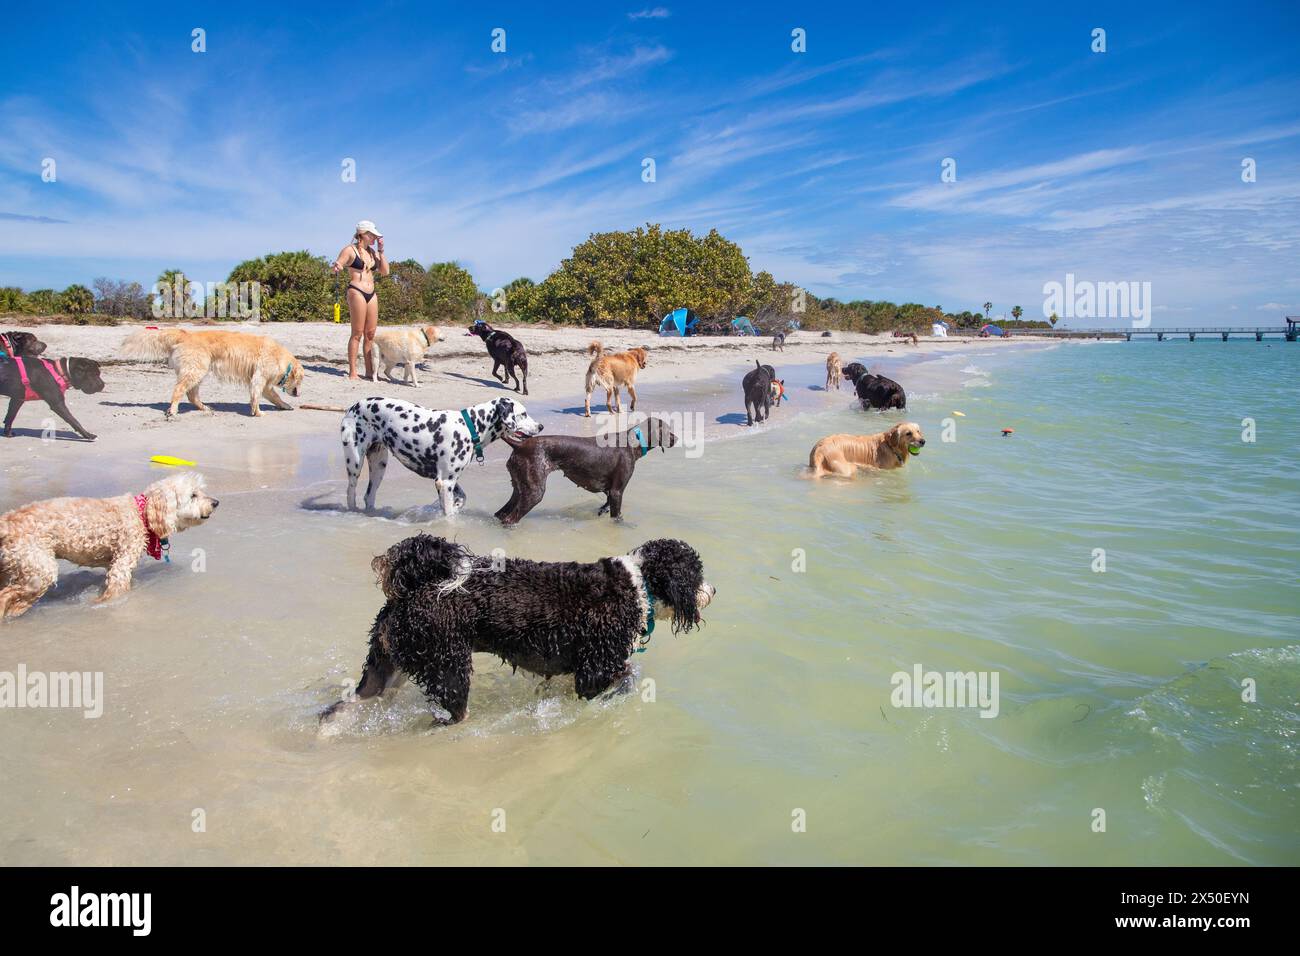 Woman in a bikini standing on a beach with a large group of assorted dogs, Florida, USA Stock Photo